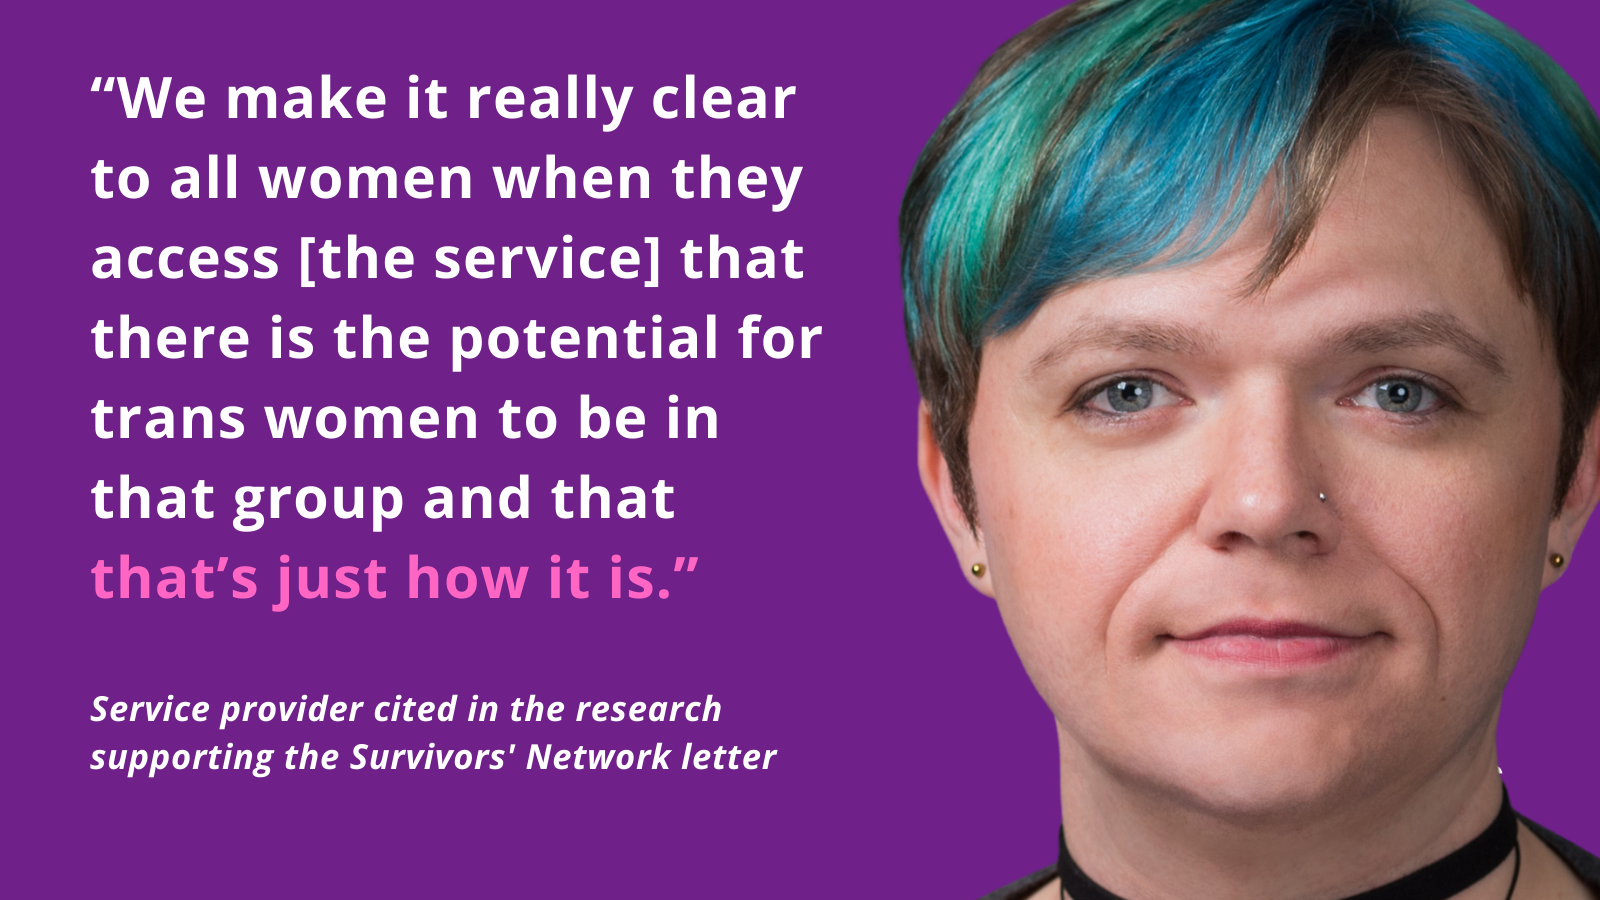 “We make it really clear to all women when they access [the service] that there is the potential for trans women to be in that group and that that’s just how it is.” Service provider cited in the research supporting the Survivors' Network letter